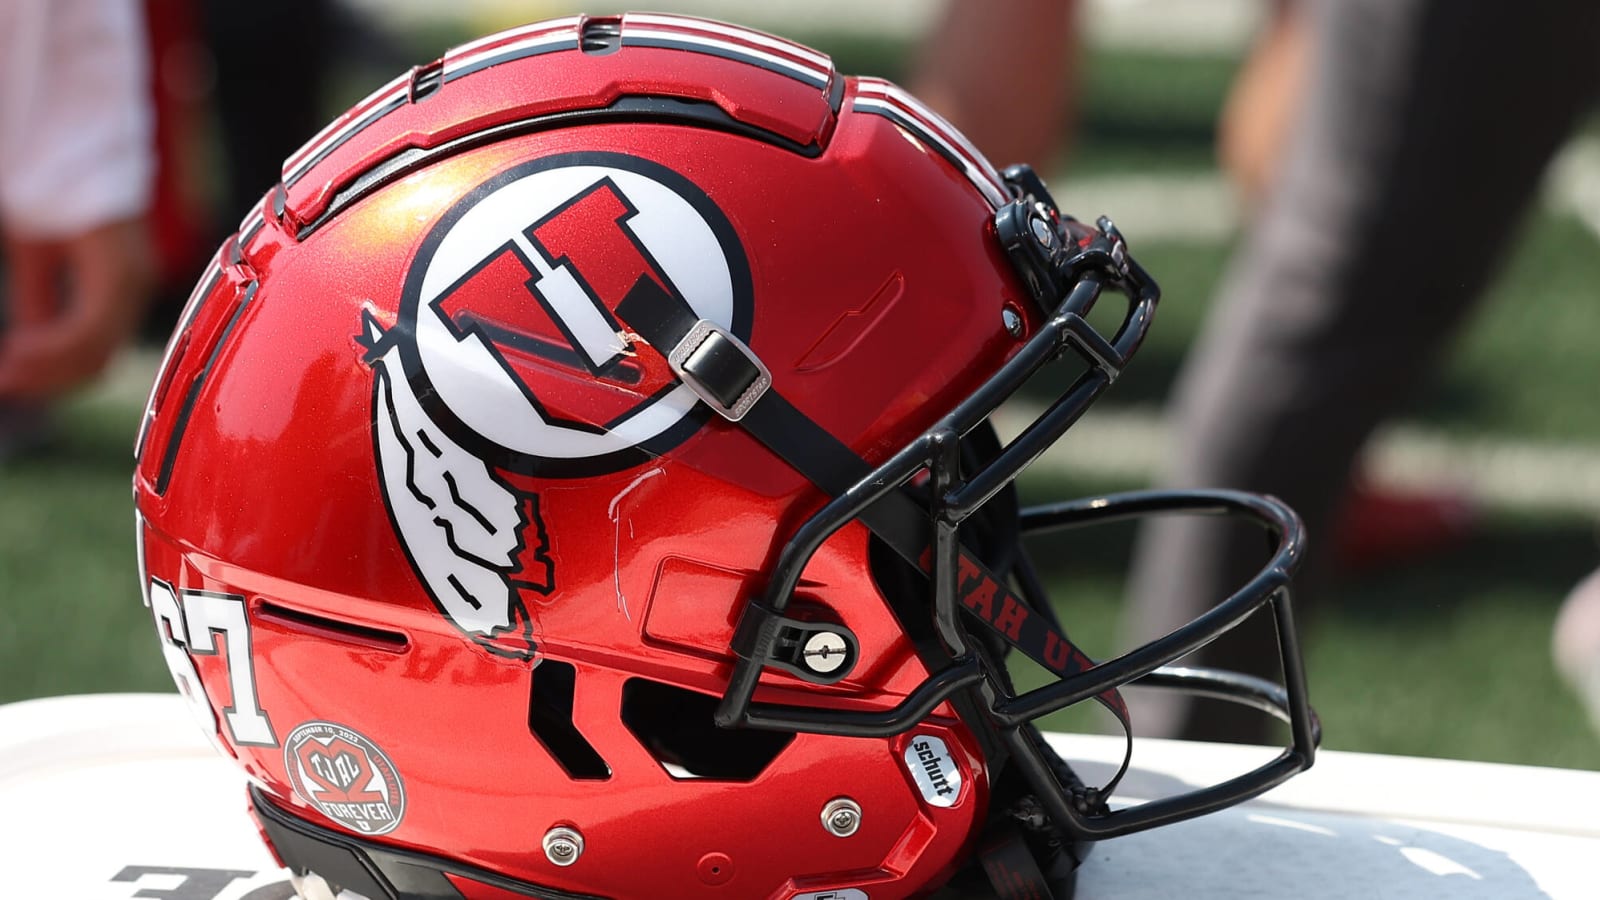 Utah football's automotive NIL deal could create trend